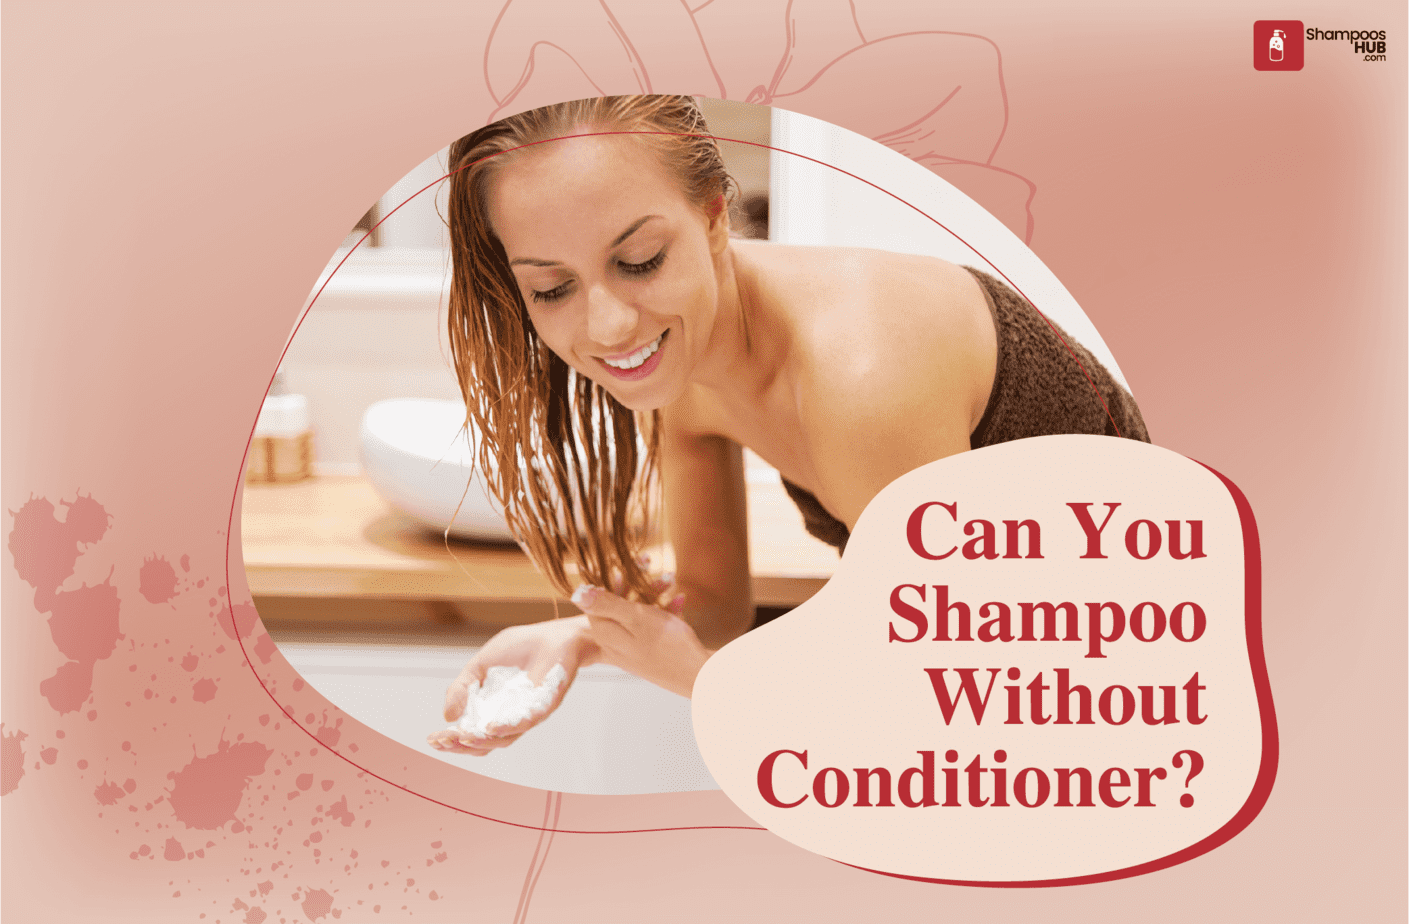 Can You Shampoo Without Conditioner?